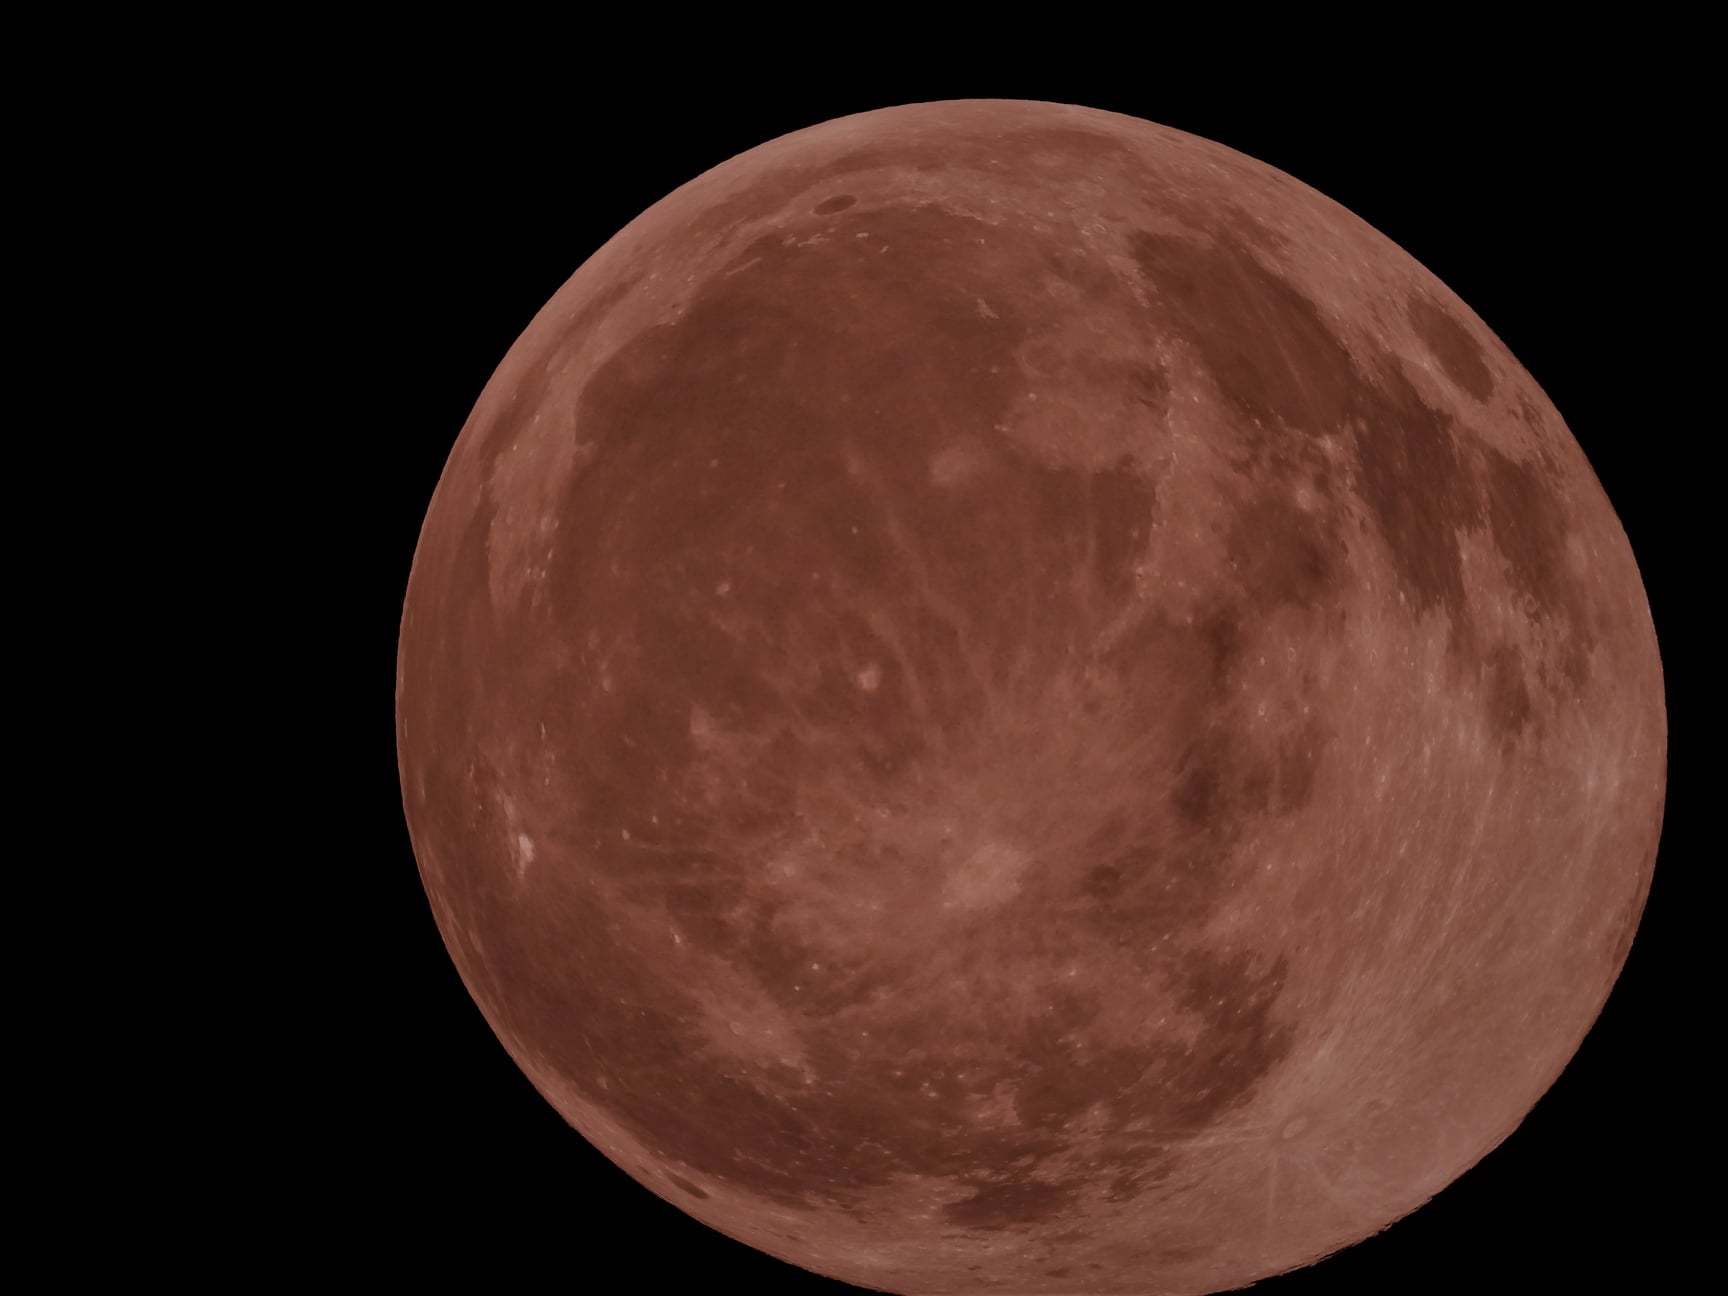 The moon does appear to be living up to its pink name in Stephen Danzigs shot